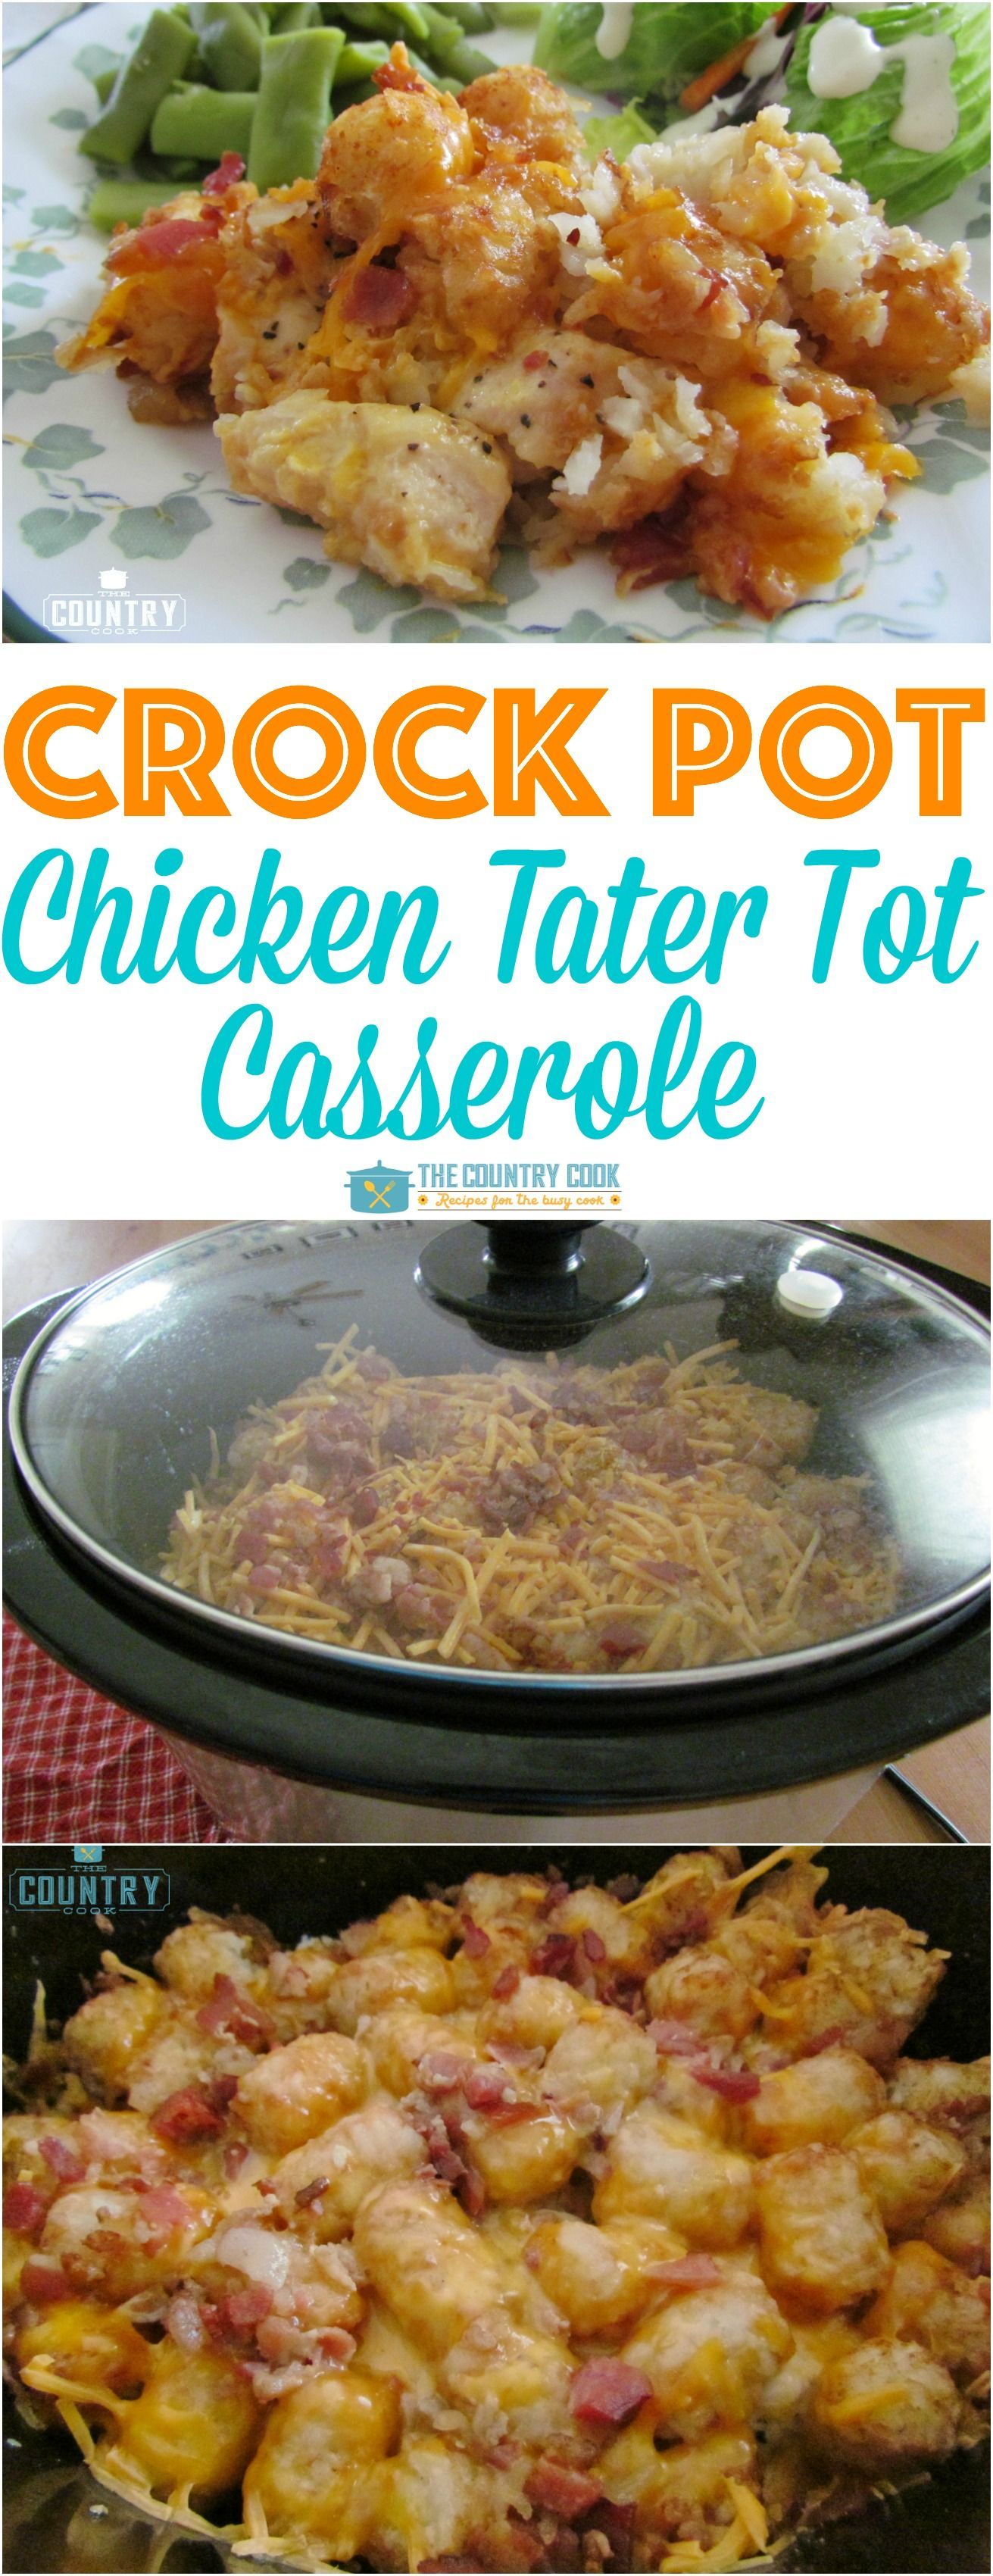 Crock Pot Cheesy Chicken Tater Tot Casserole recipe from The Country Cook